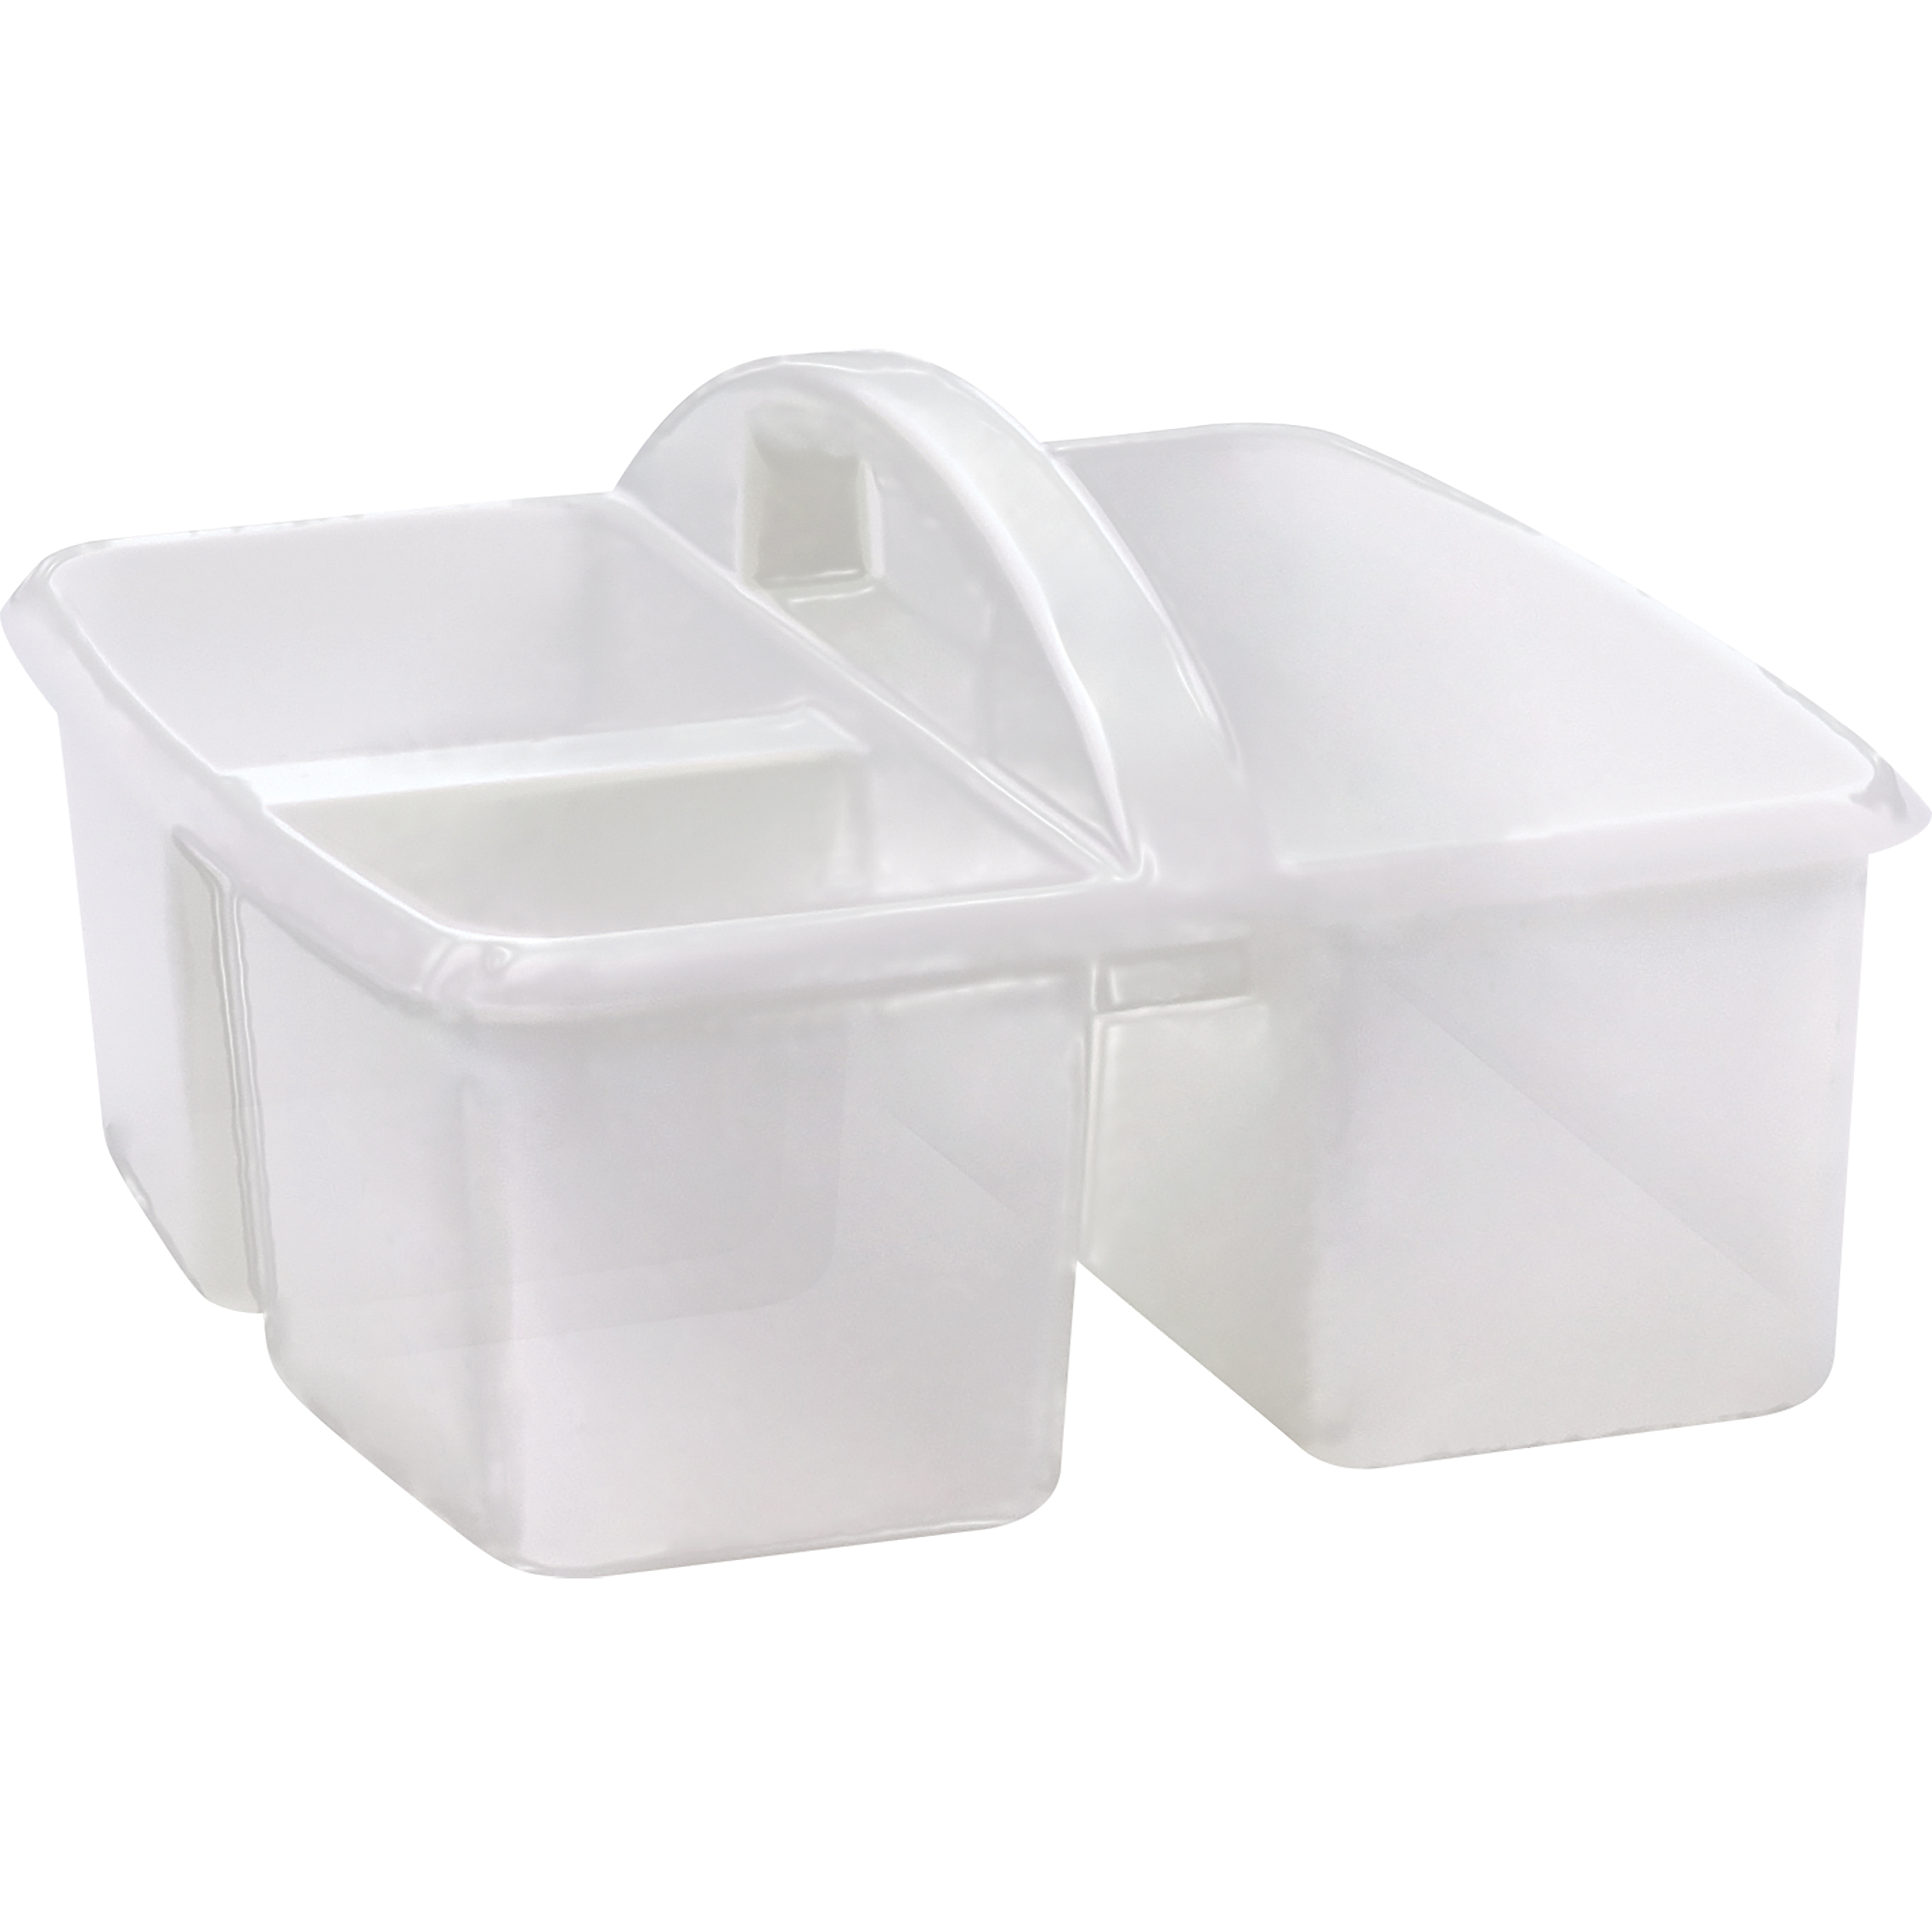 The Teachers' Lounge®  Small Plastic Storage Bin, Clear, Pack of 6